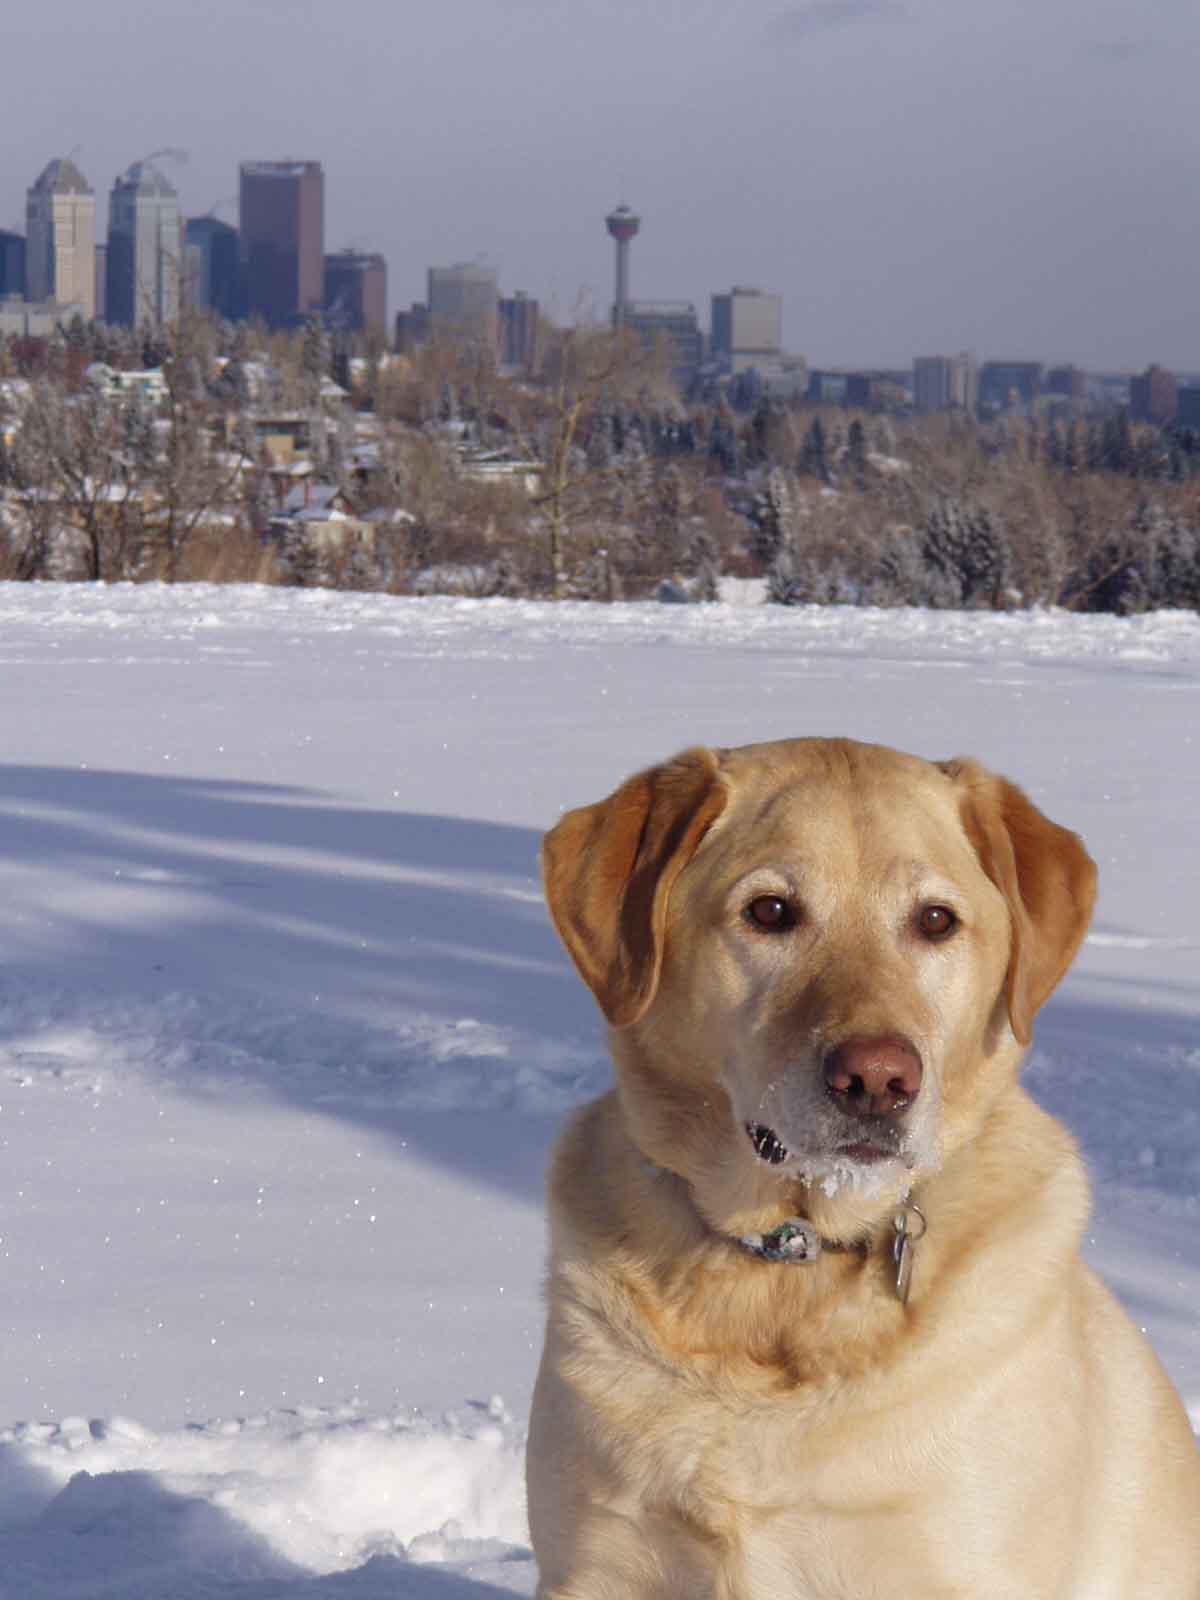 A picture of Sam in the snow, with the Calgary skyline in the background